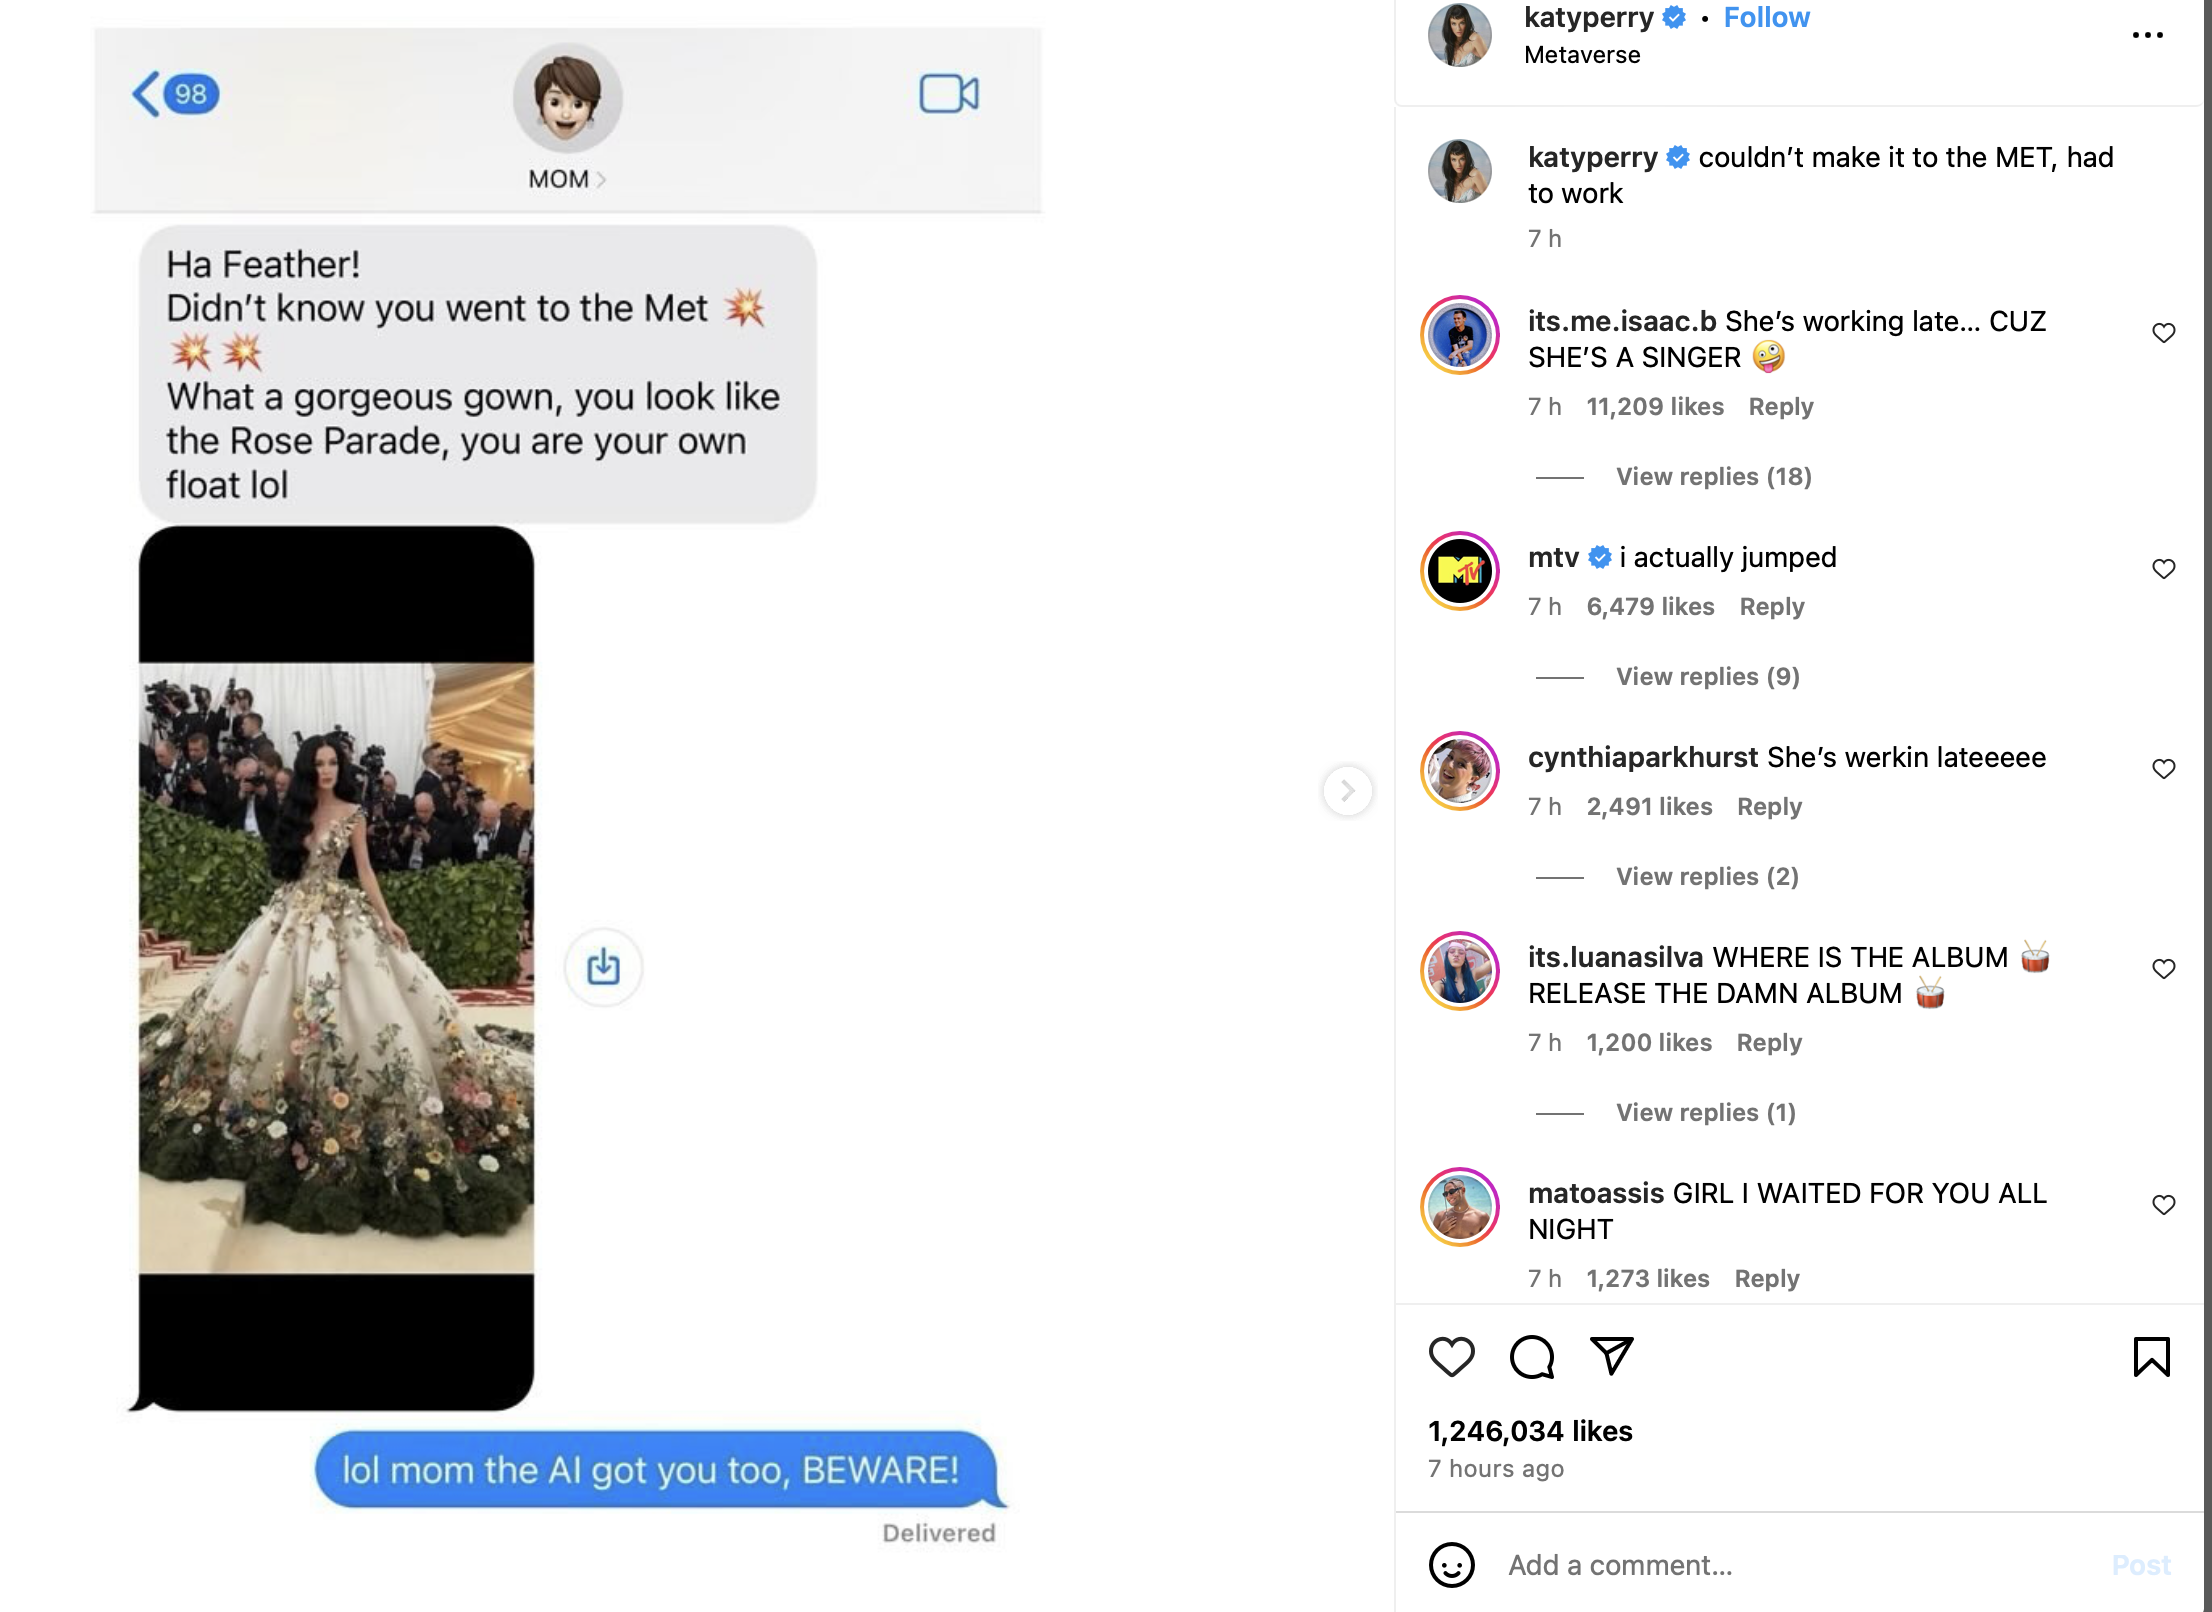 Katy Perry AI photos tricked her own mom, screenshot from her Instagram showing the text exchange